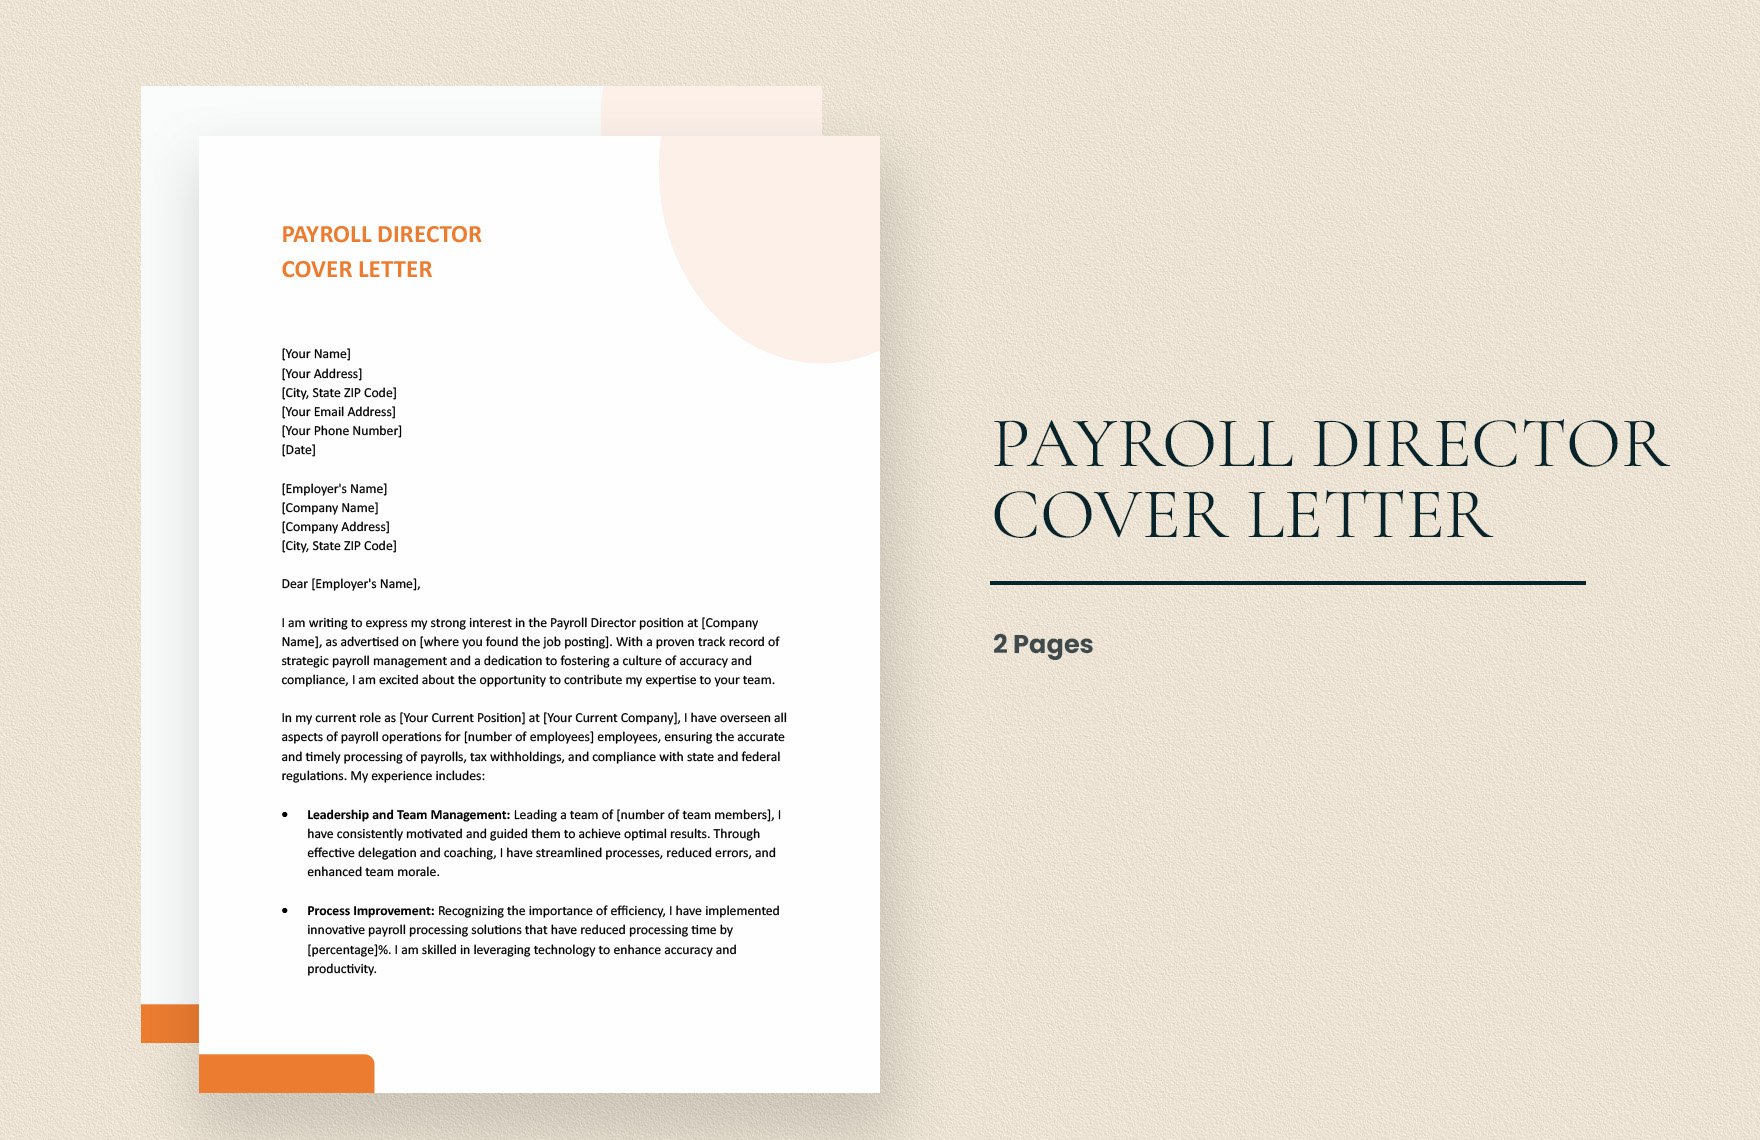 Payroll Director Cover Letter